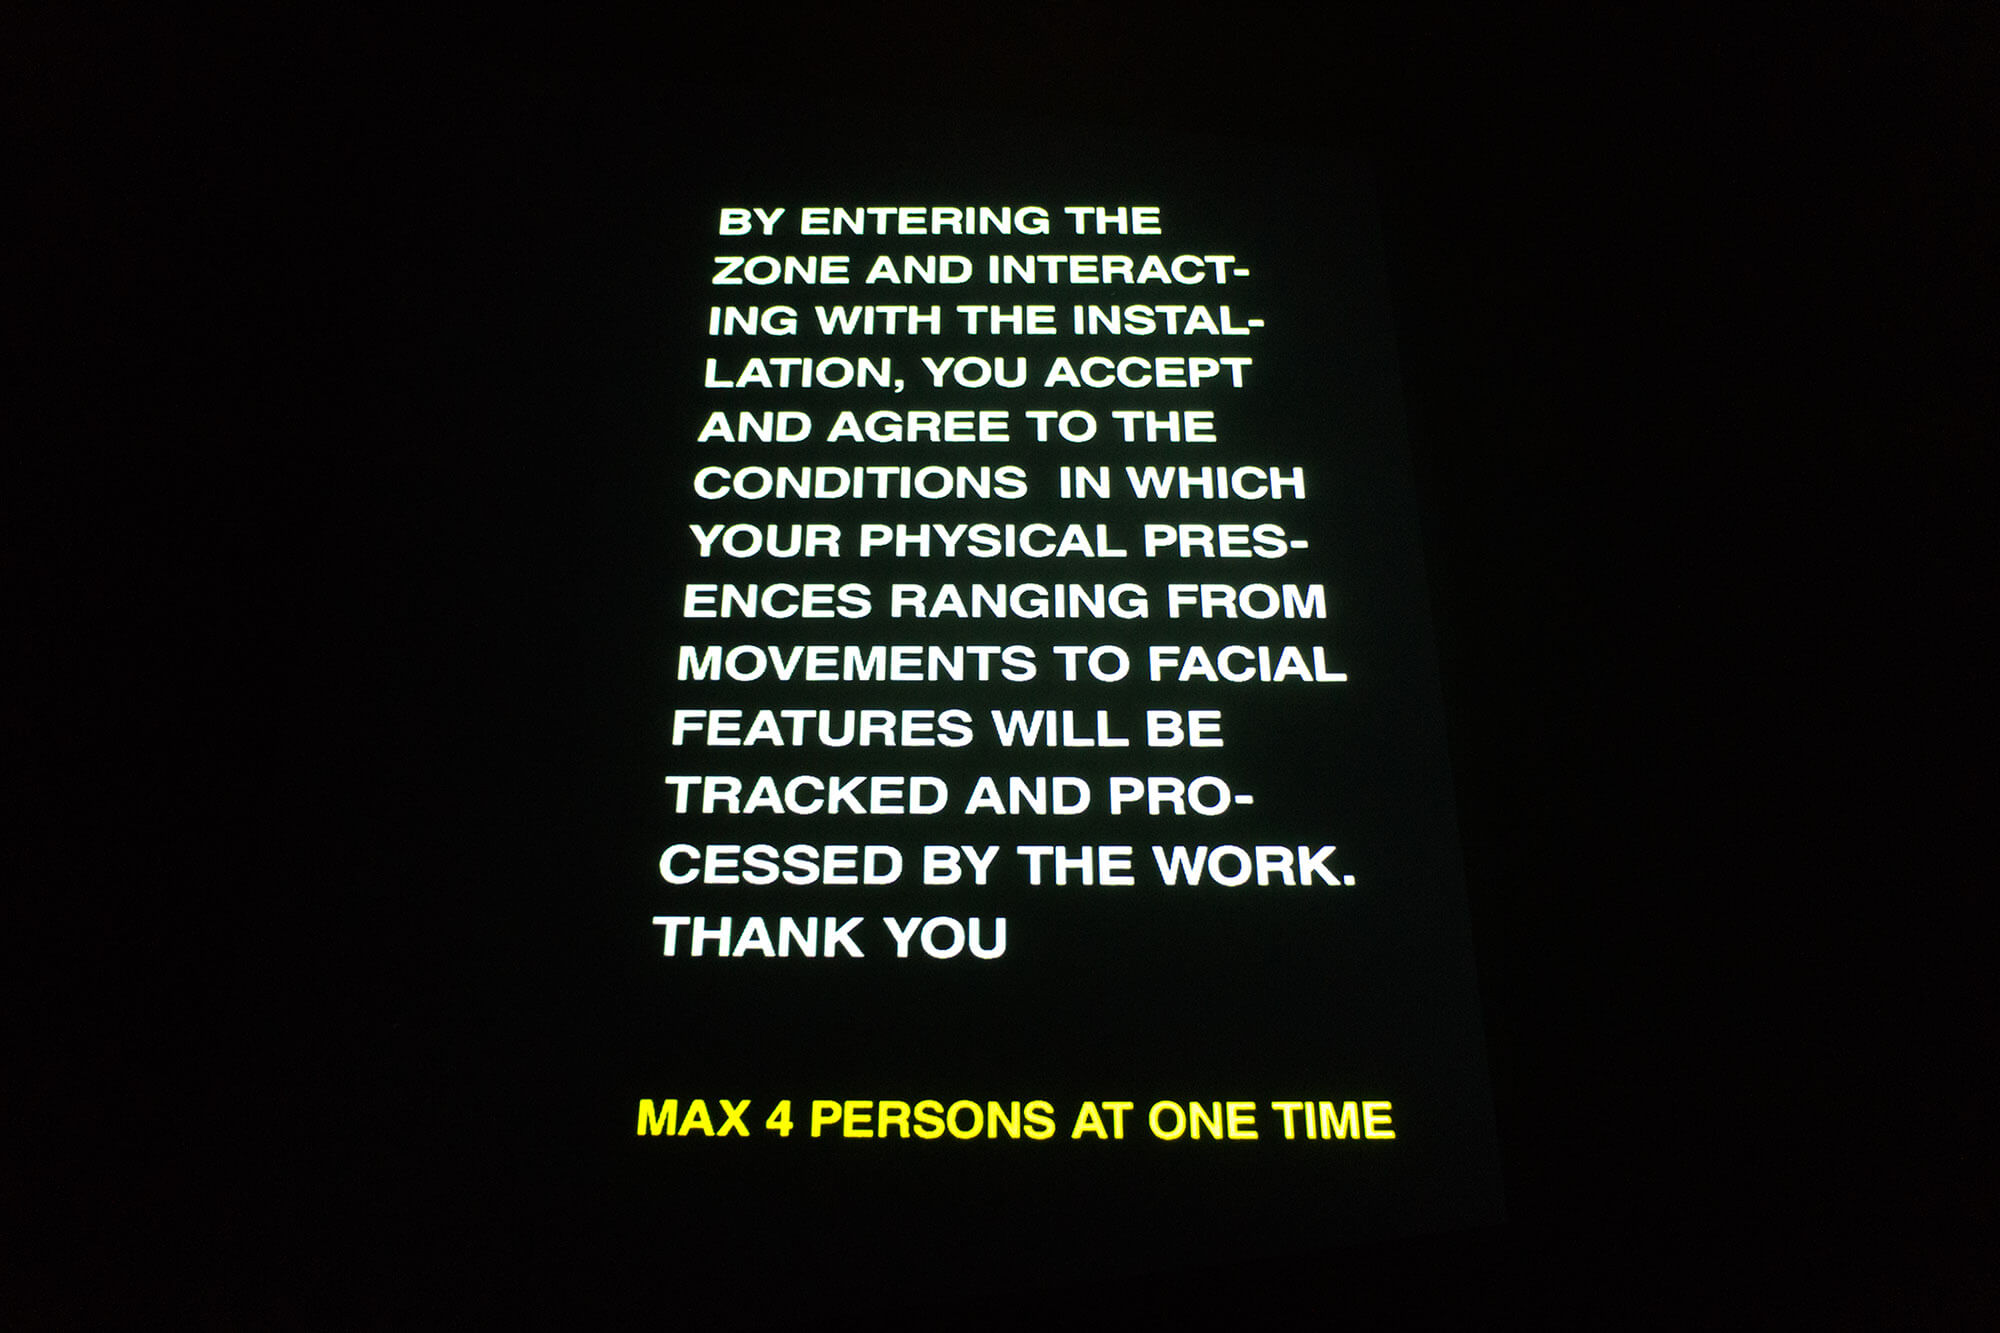 Terms and conditions for interacting with the installation projected onto a wall